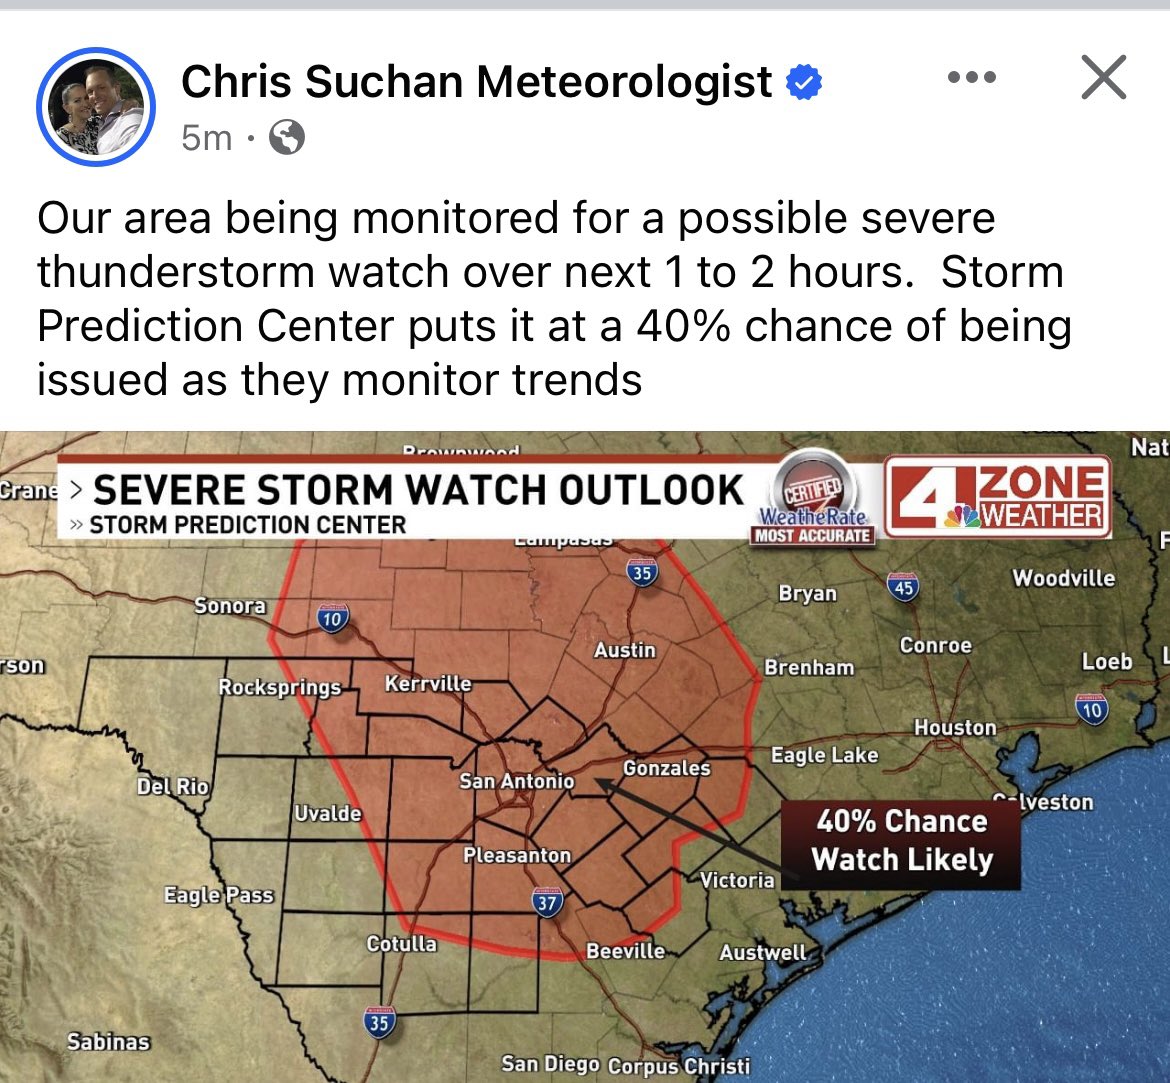 southtexas world wide weather team (@Michael65990587) on Twitter photo 2024-05-01 21:46:07